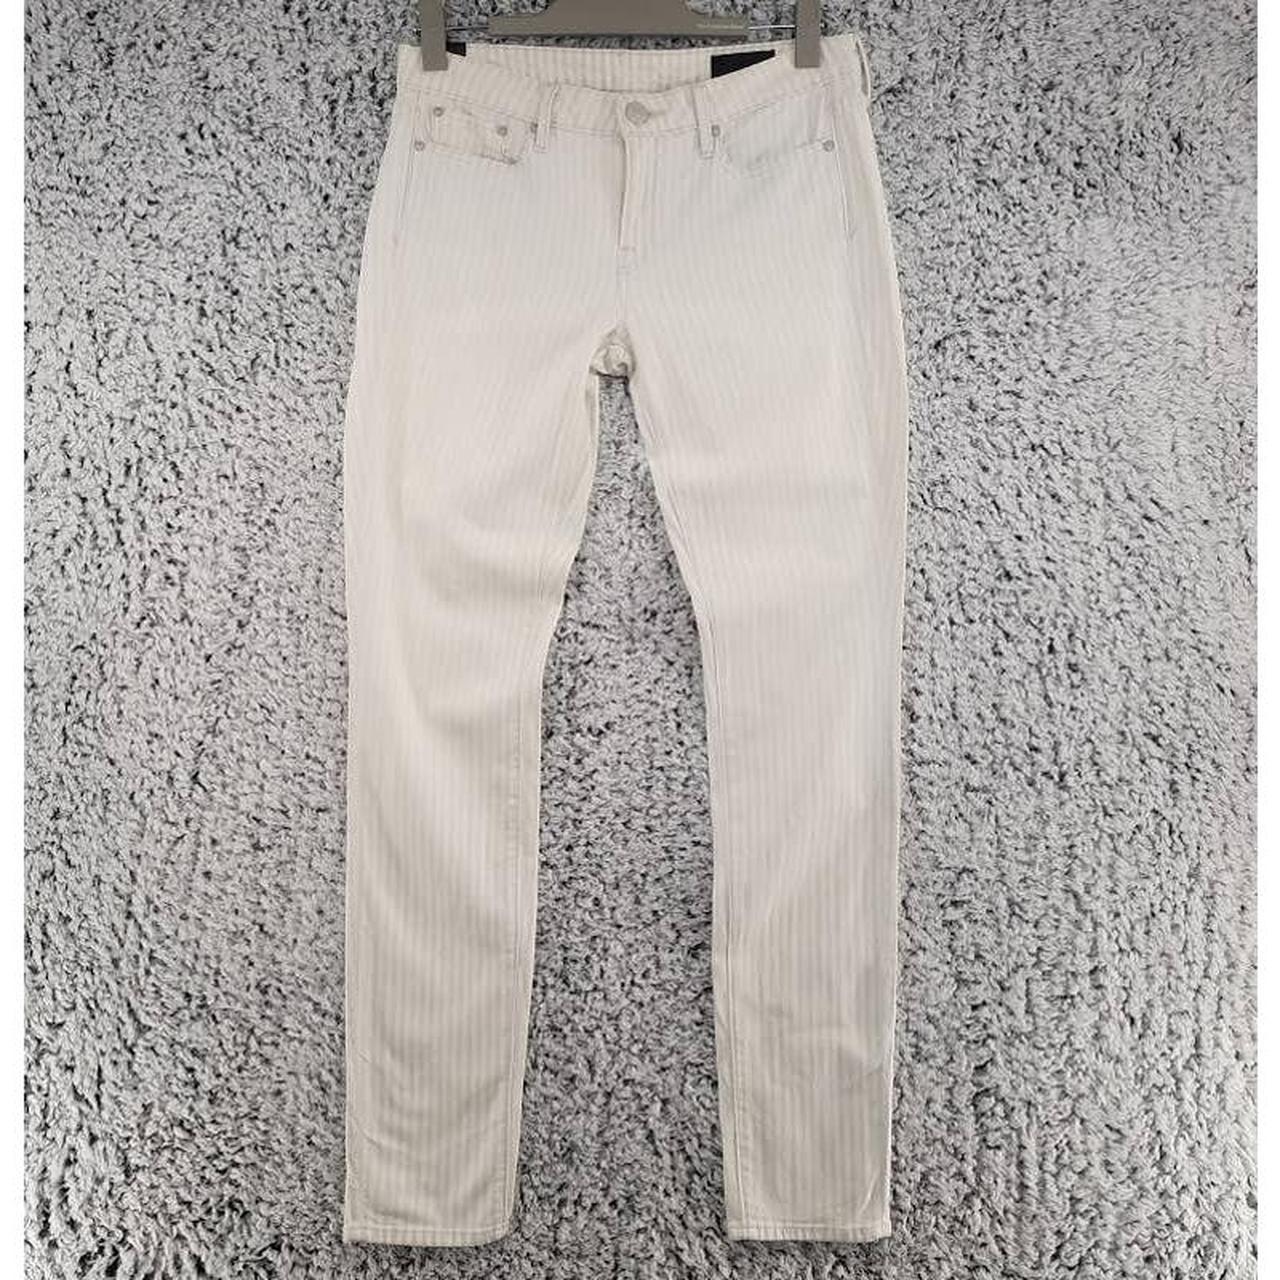 Vince Women's White and Grey Jeans